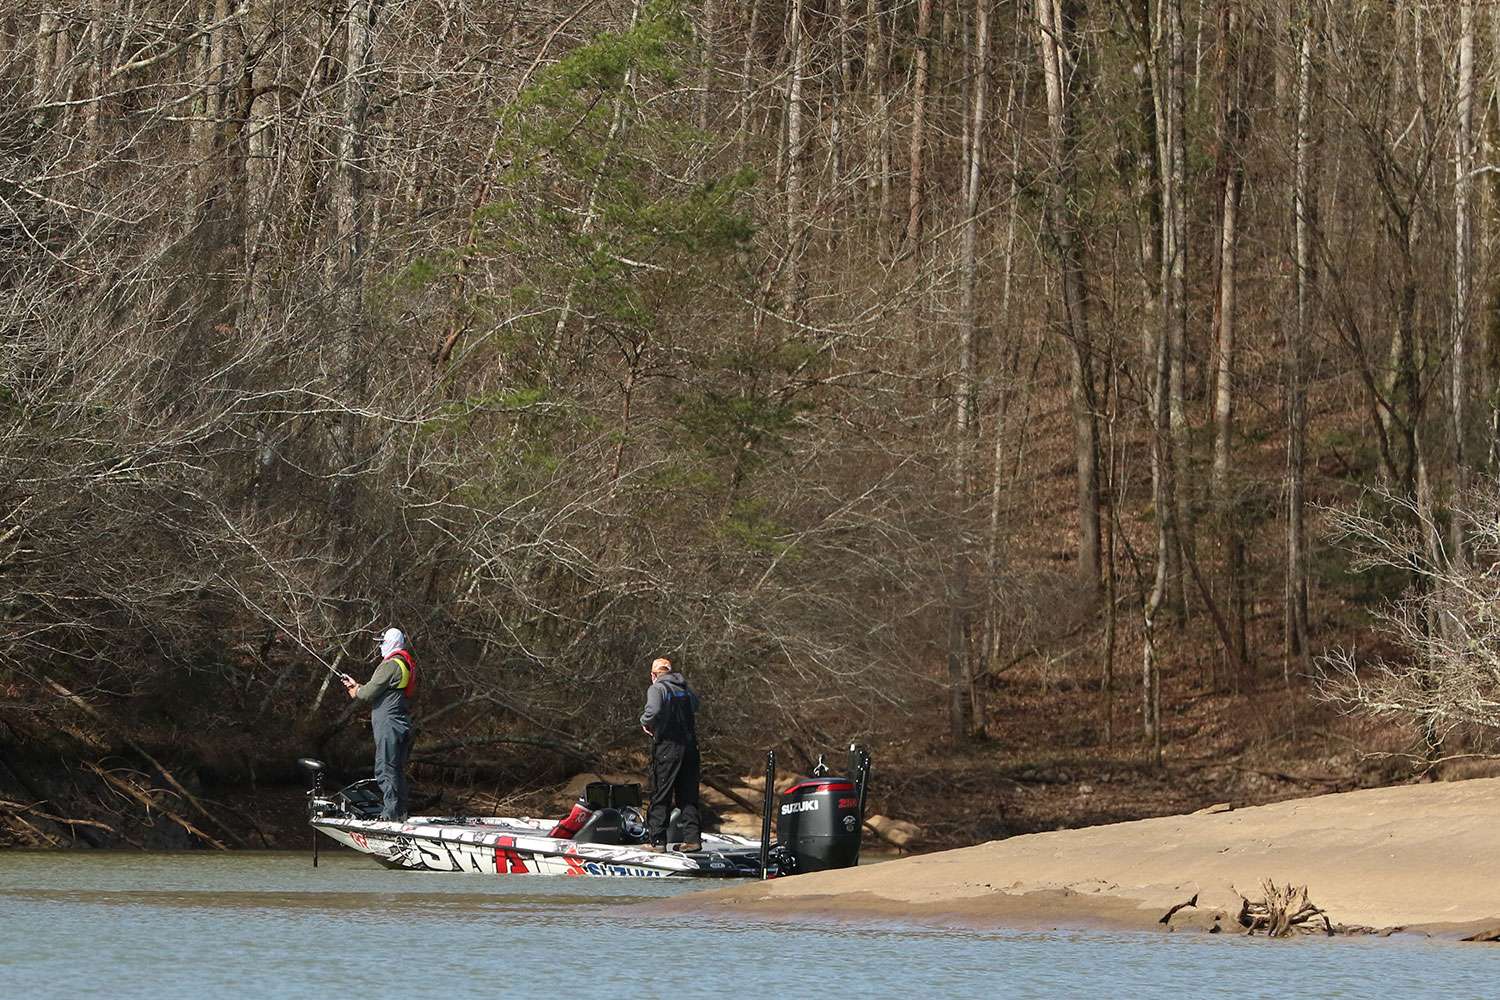 Take a peak at the exciting afternoon on Tellico Reservoir Day 1 of the 2019 GEICO Bassmaster Classic presented by DICK'S Sporting Goods.